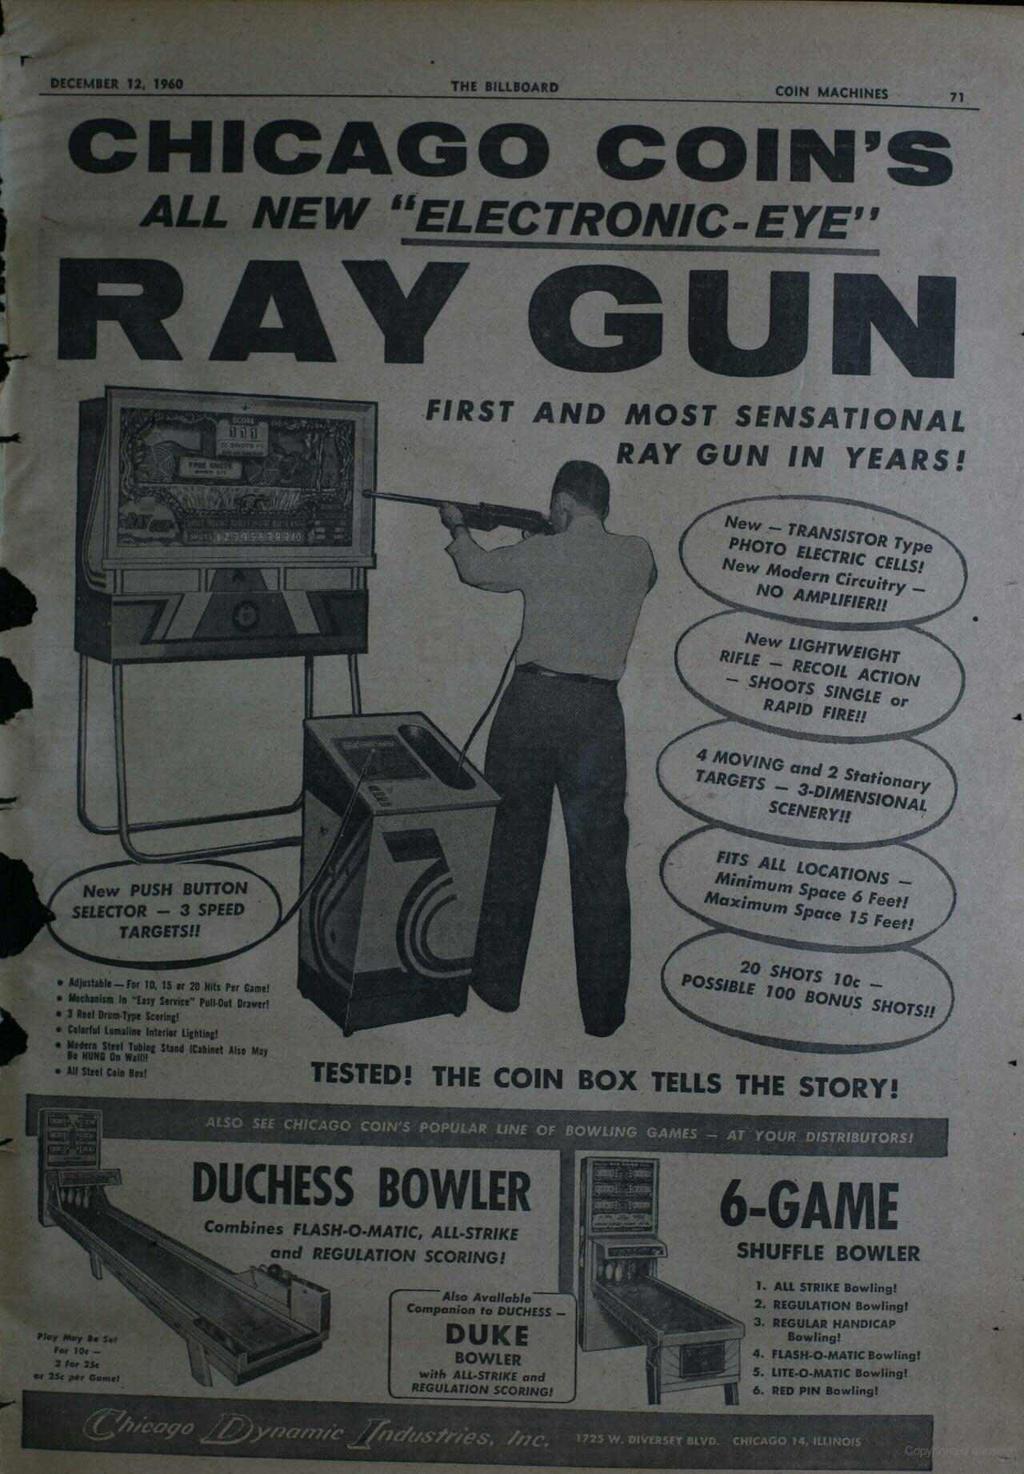 r CHICAGO COIN'S ALL NEW "ELECTRONIC-EYE" DECEMBER 12, 1960 THE BILLBOARD COIN MACHINES 71 FRAY GUN FIRST AND MOST SENSATIONAL RAY GUN IN YEARS! New - TRANSISTOR Type ì ELECTRIC CELLS!